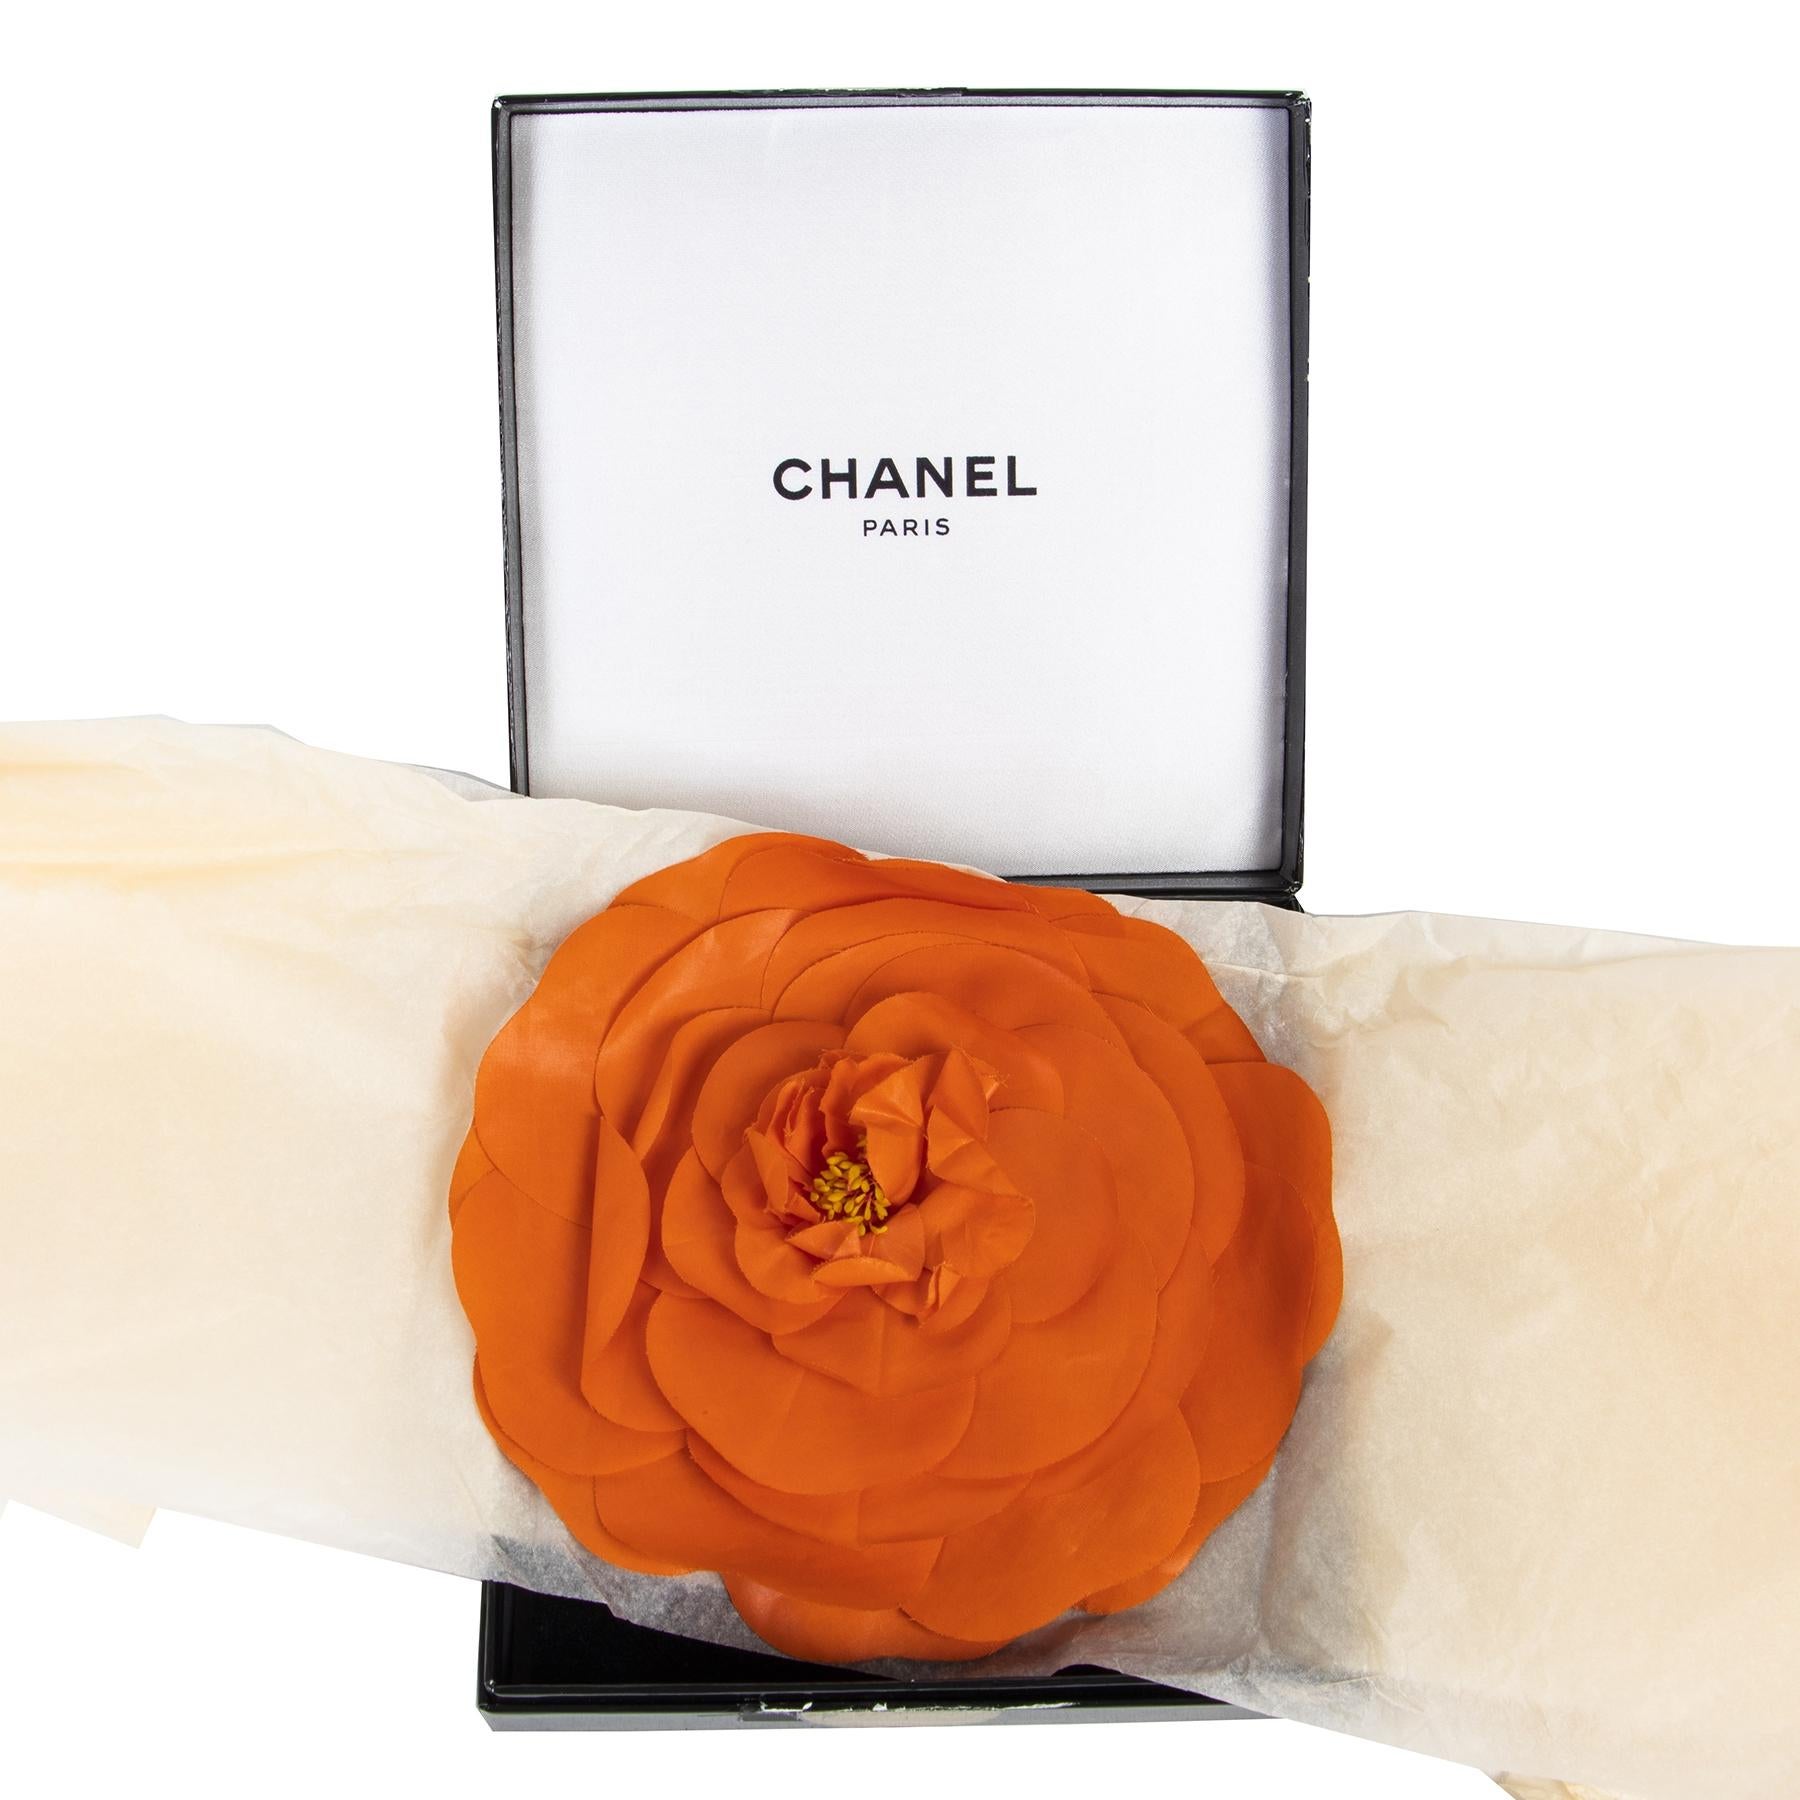 Good preloved condition

Chanel Orange Camellia Flower Brooch Pin

This stunning Chanel Camellia flower brooch will brighten up any outfit! This brooch with the iconic flower comes in a gorgeous orange and features a flowerstem at the pin with